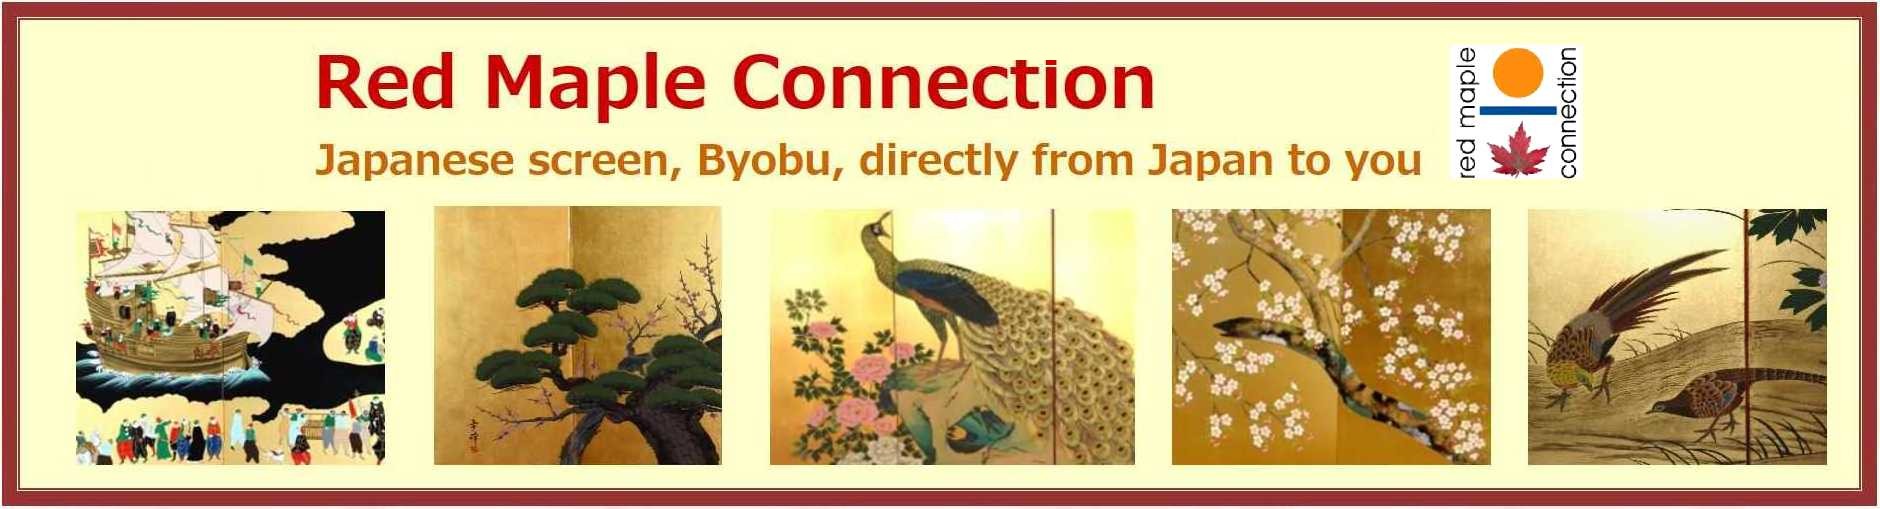 Japanese folding screen Byobu shop - Red Maple Connection